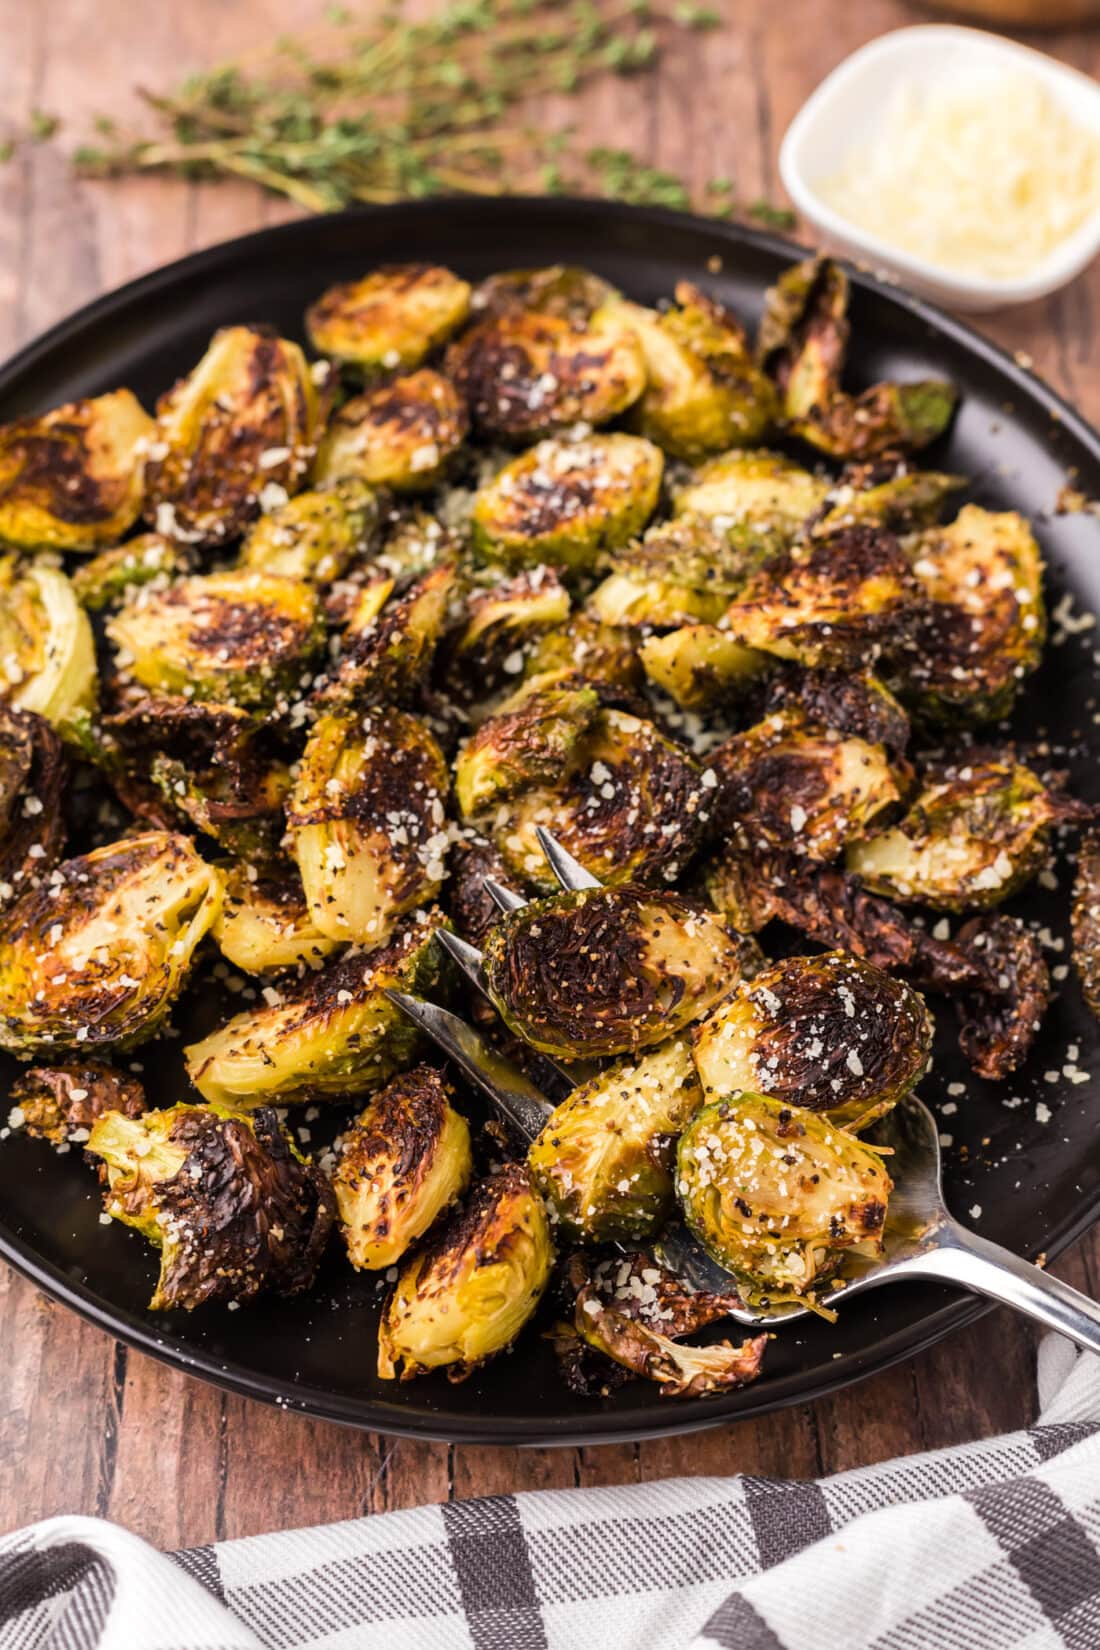 Plate of Roasted Brussel Sprouts with a fork